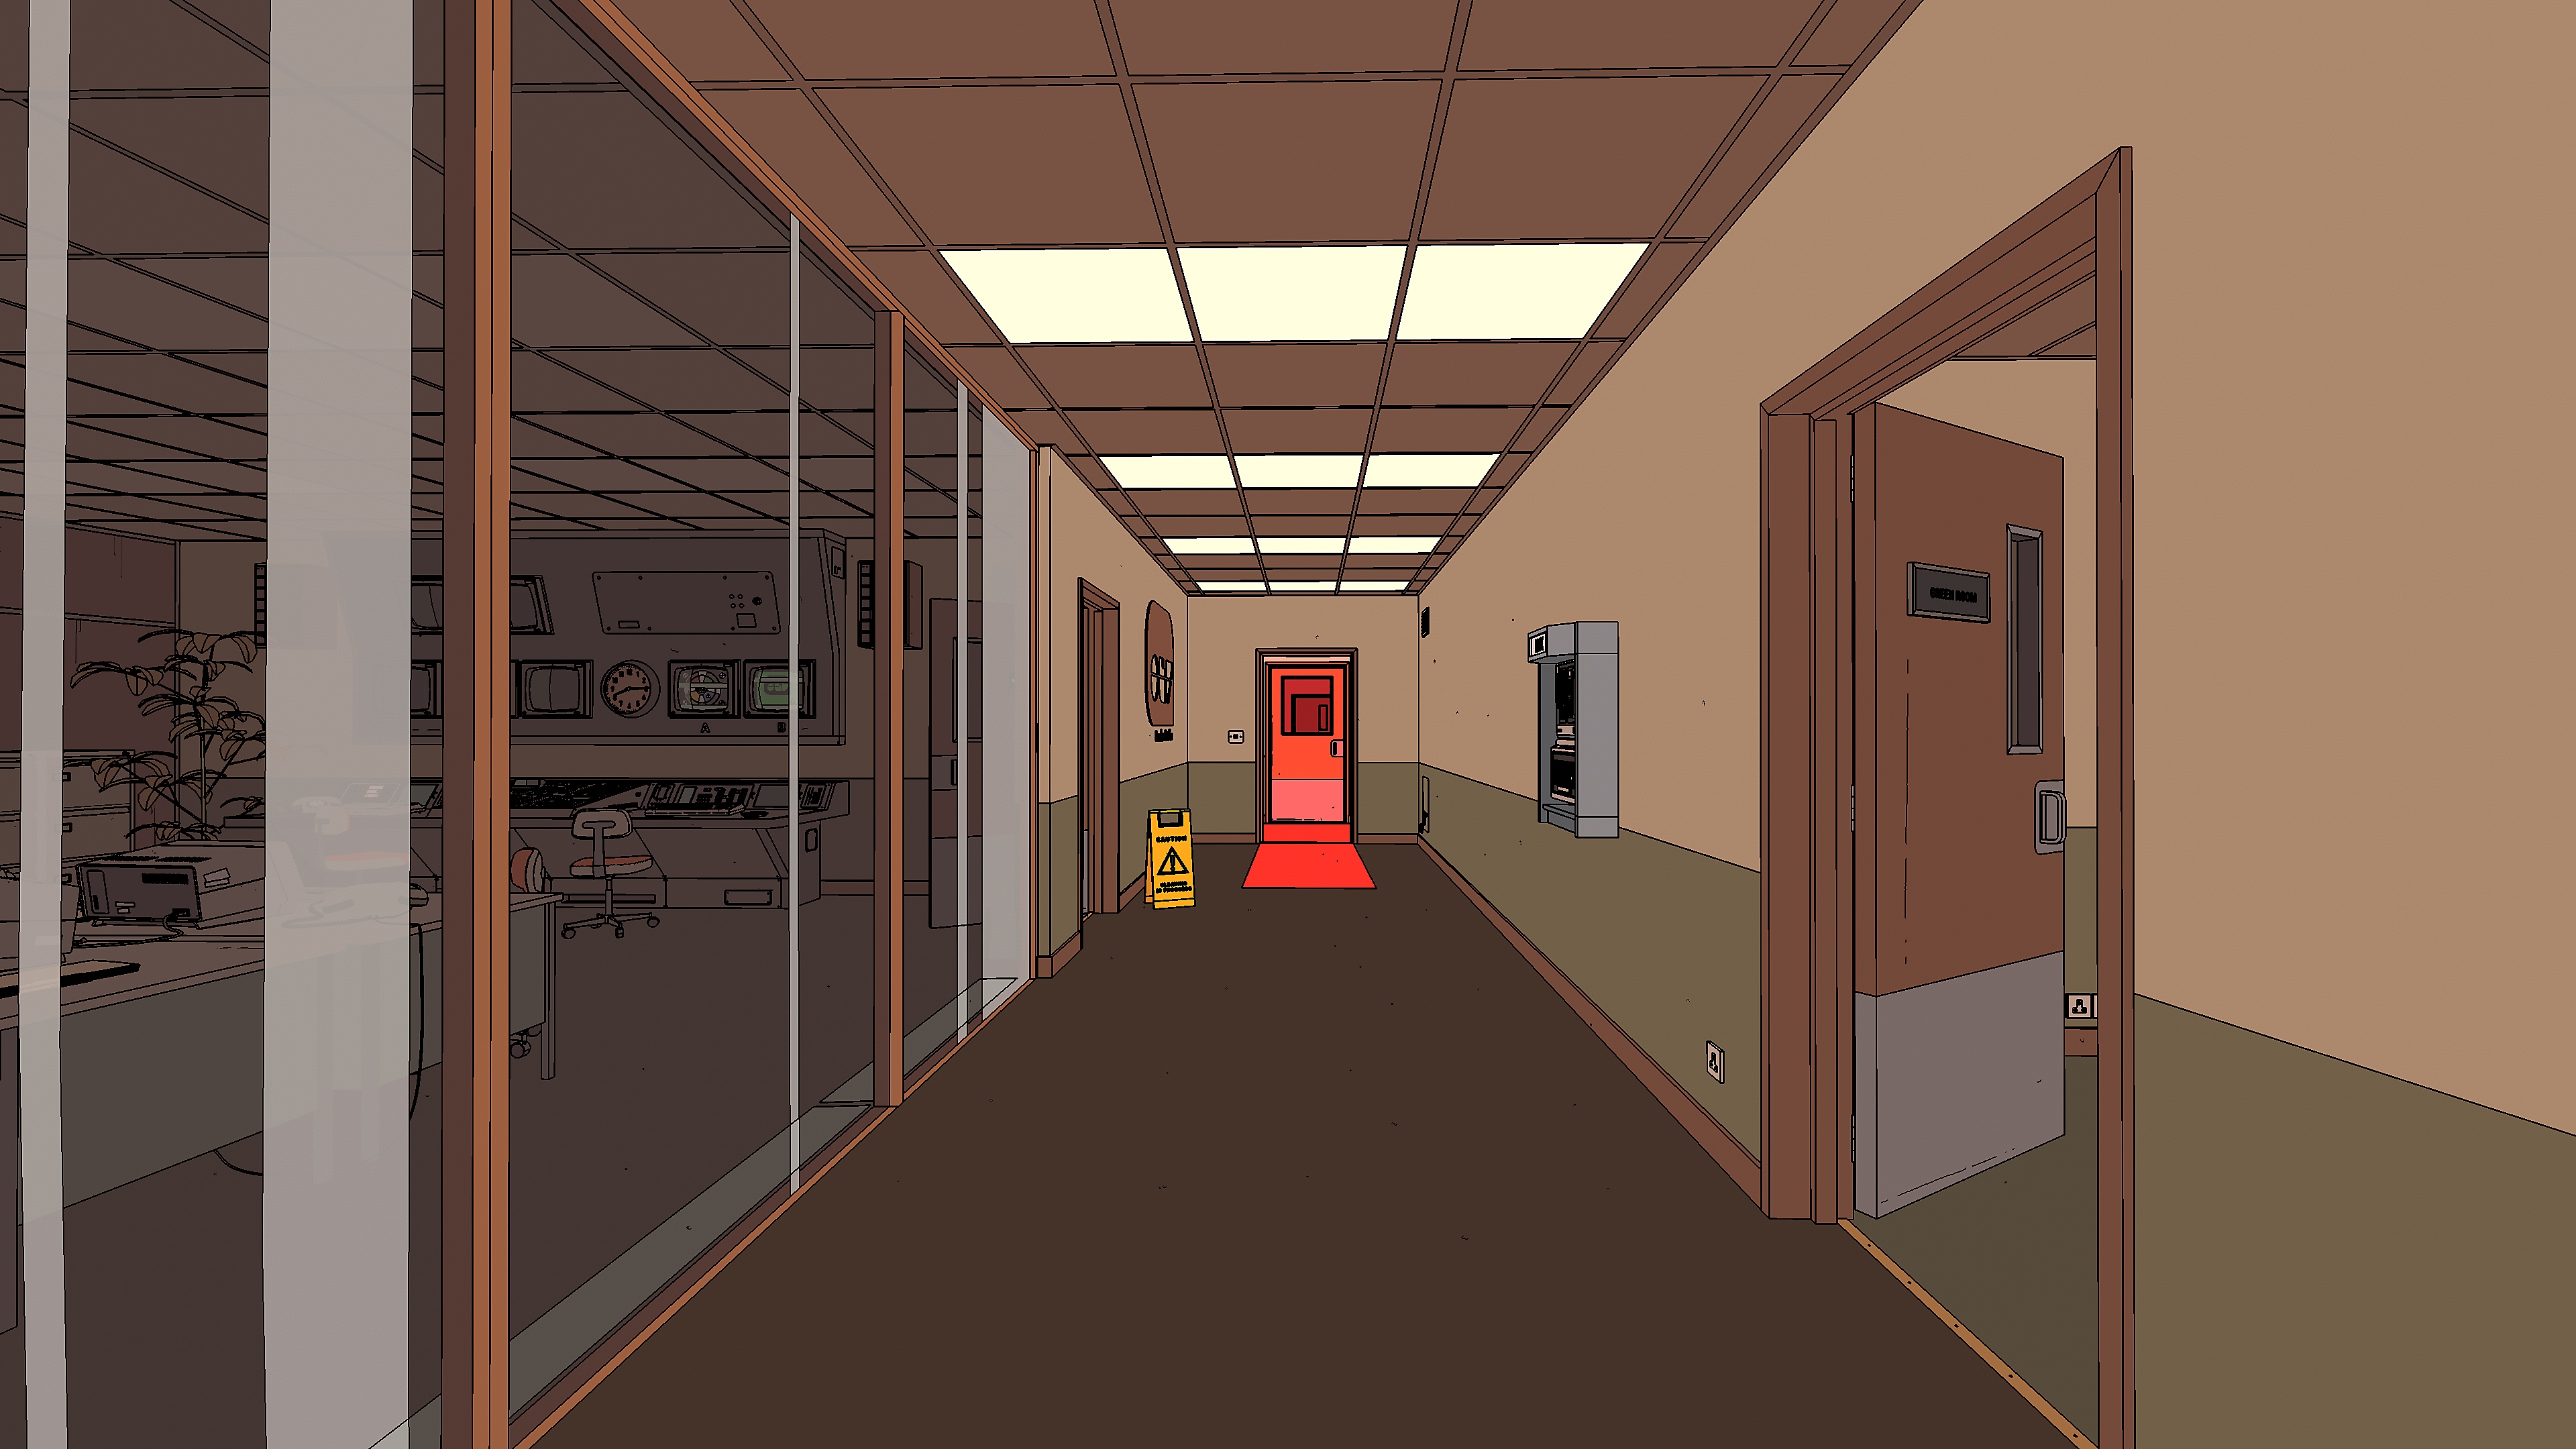 Rollerdrome screenshot showing a corridor with doors leading off it